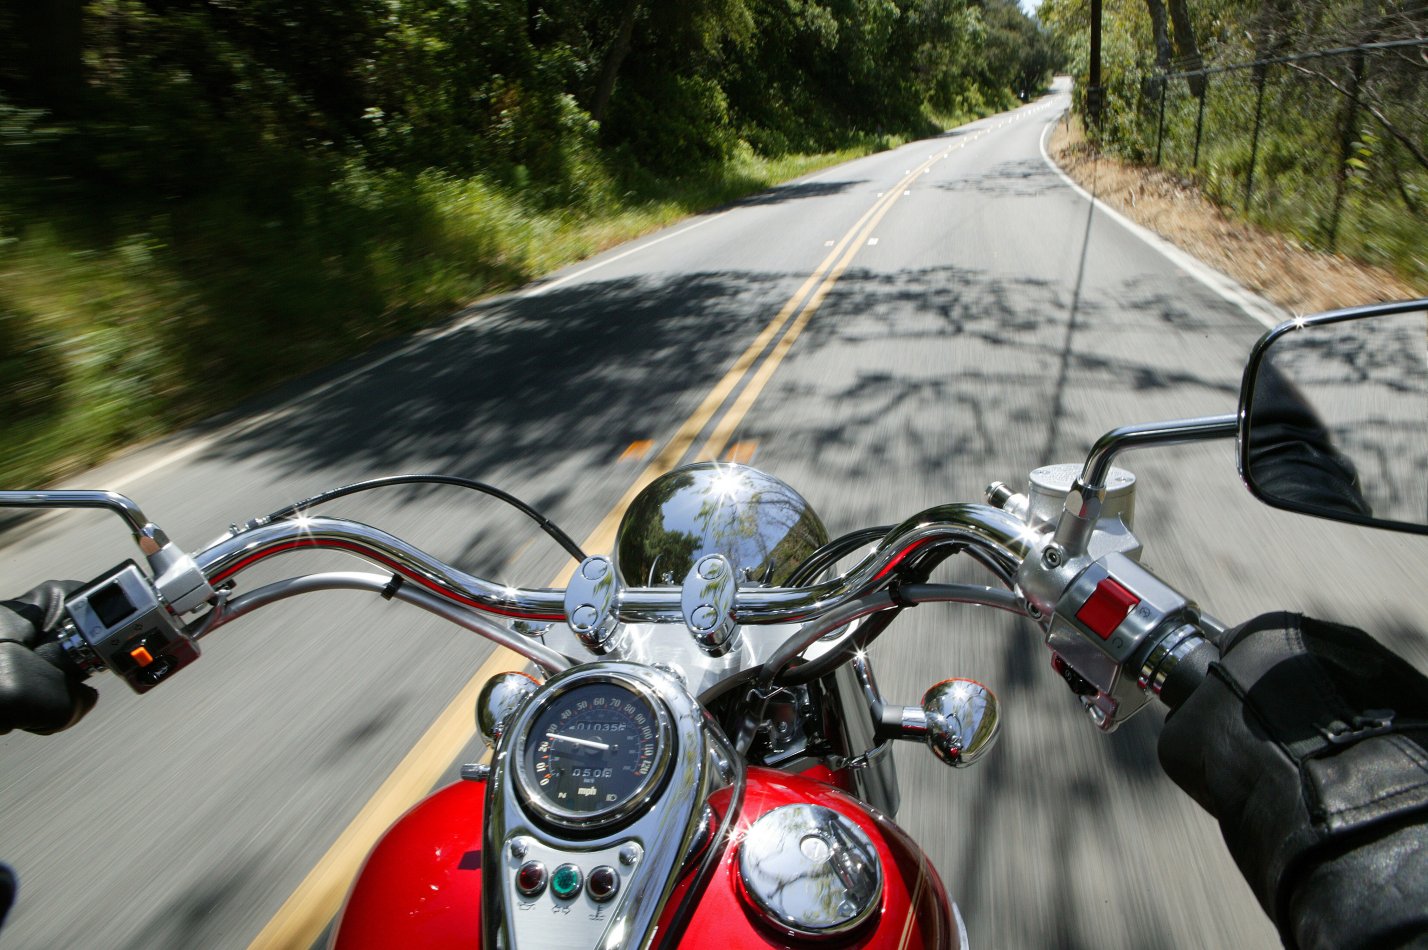 The Motorcycle Rental Revolution: Top Reasons to Rent and Ride